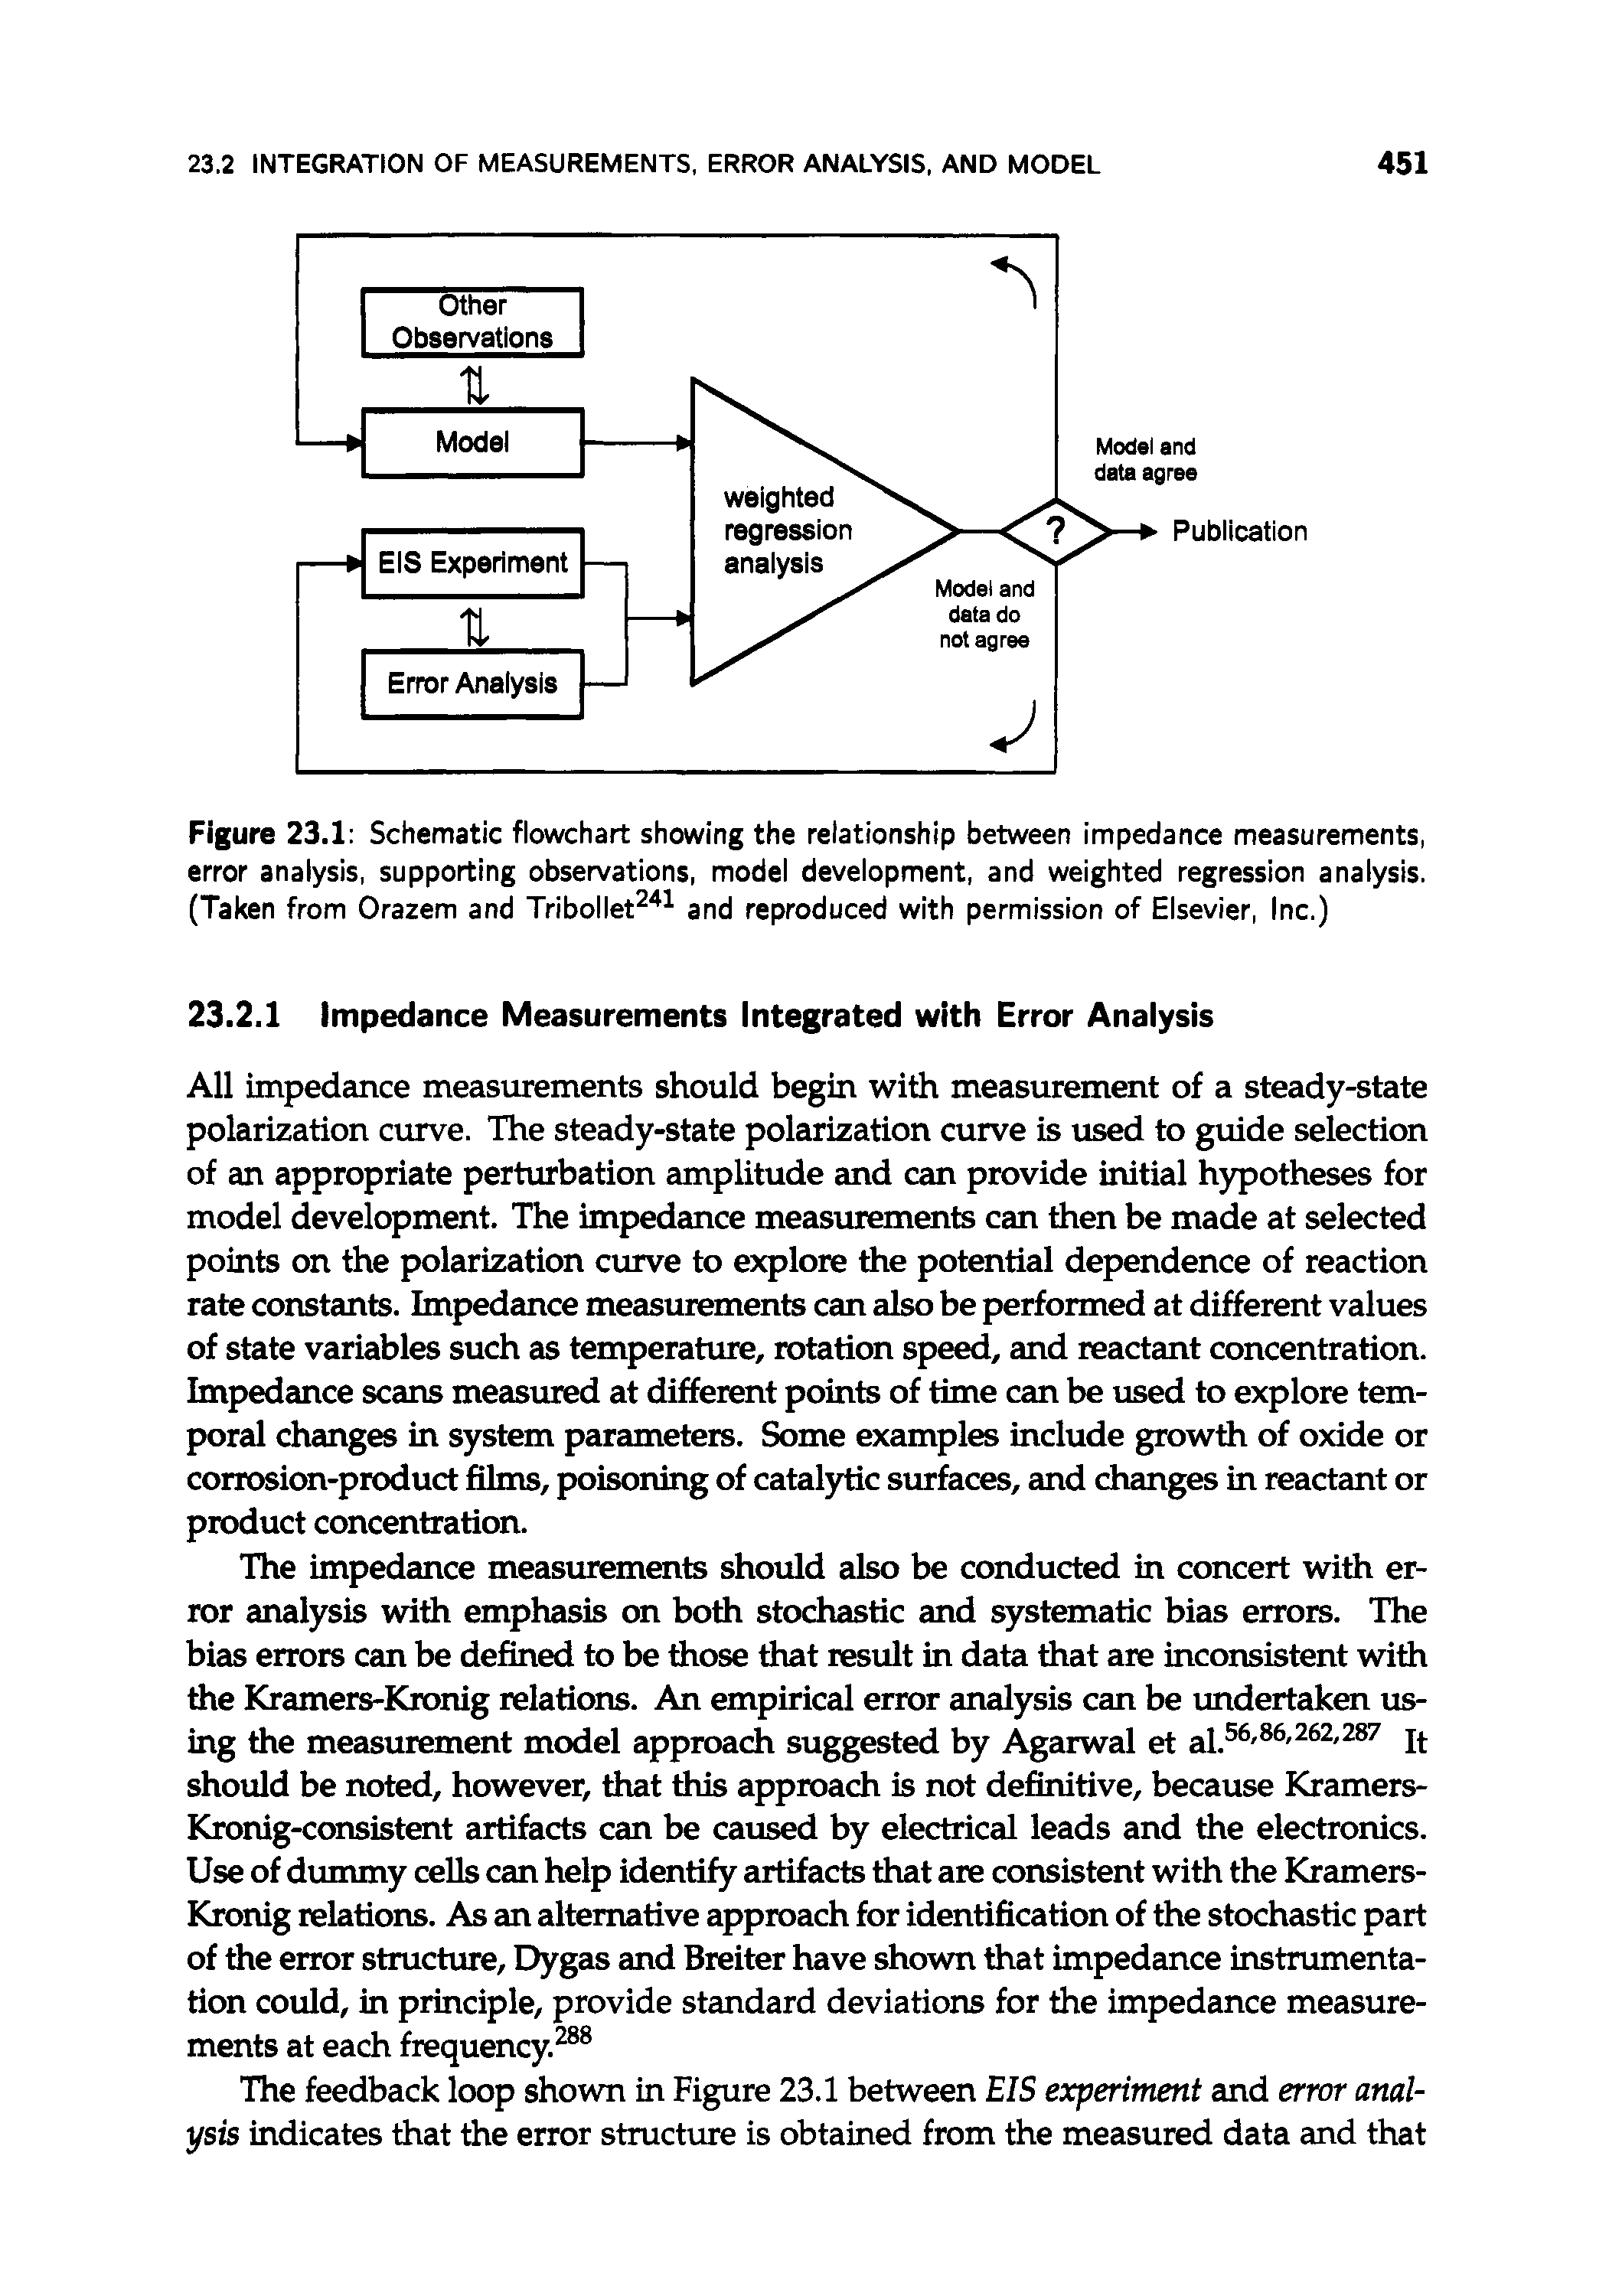 Figure 23.1 Schematic flowchart showing the relationship between impedance measurements, error analysis, supporting observations, model development, and weighted regression analysis. (Taken from Orazem and Tribollet and reproduced with permission of Elsevier, Inc.)...